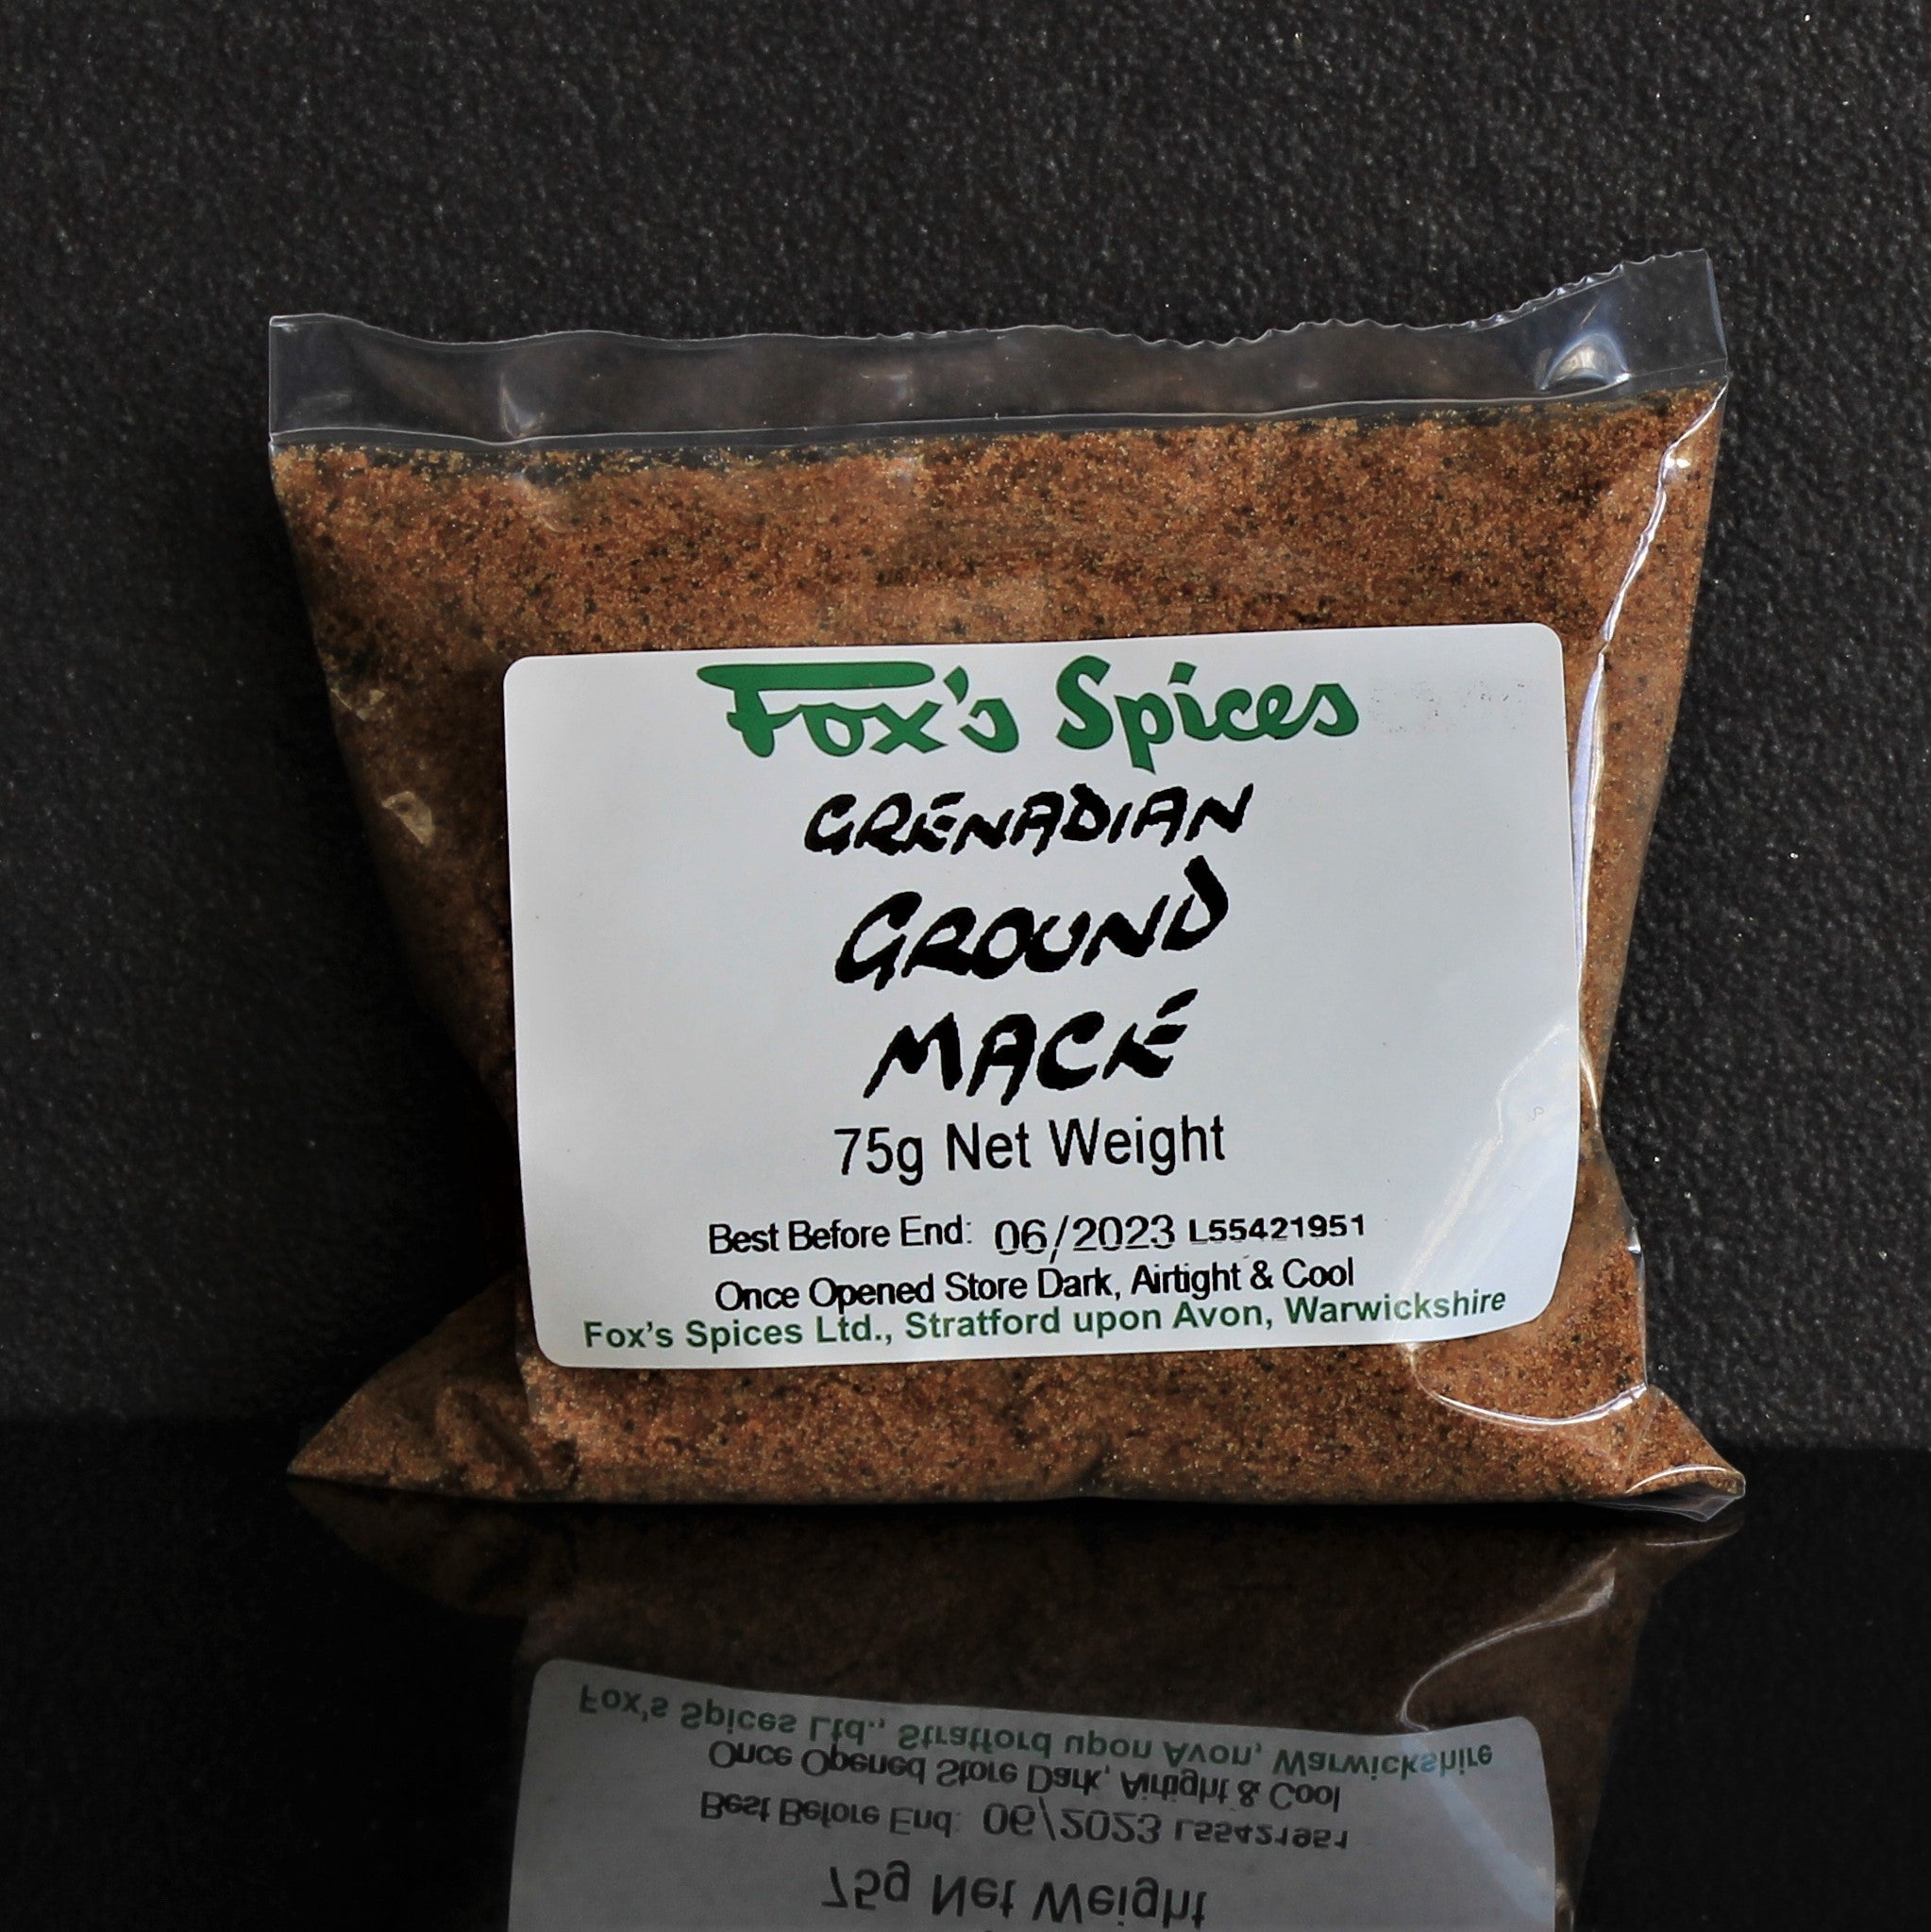 A 75g bag of Fox's Spices Grenadian ground mace